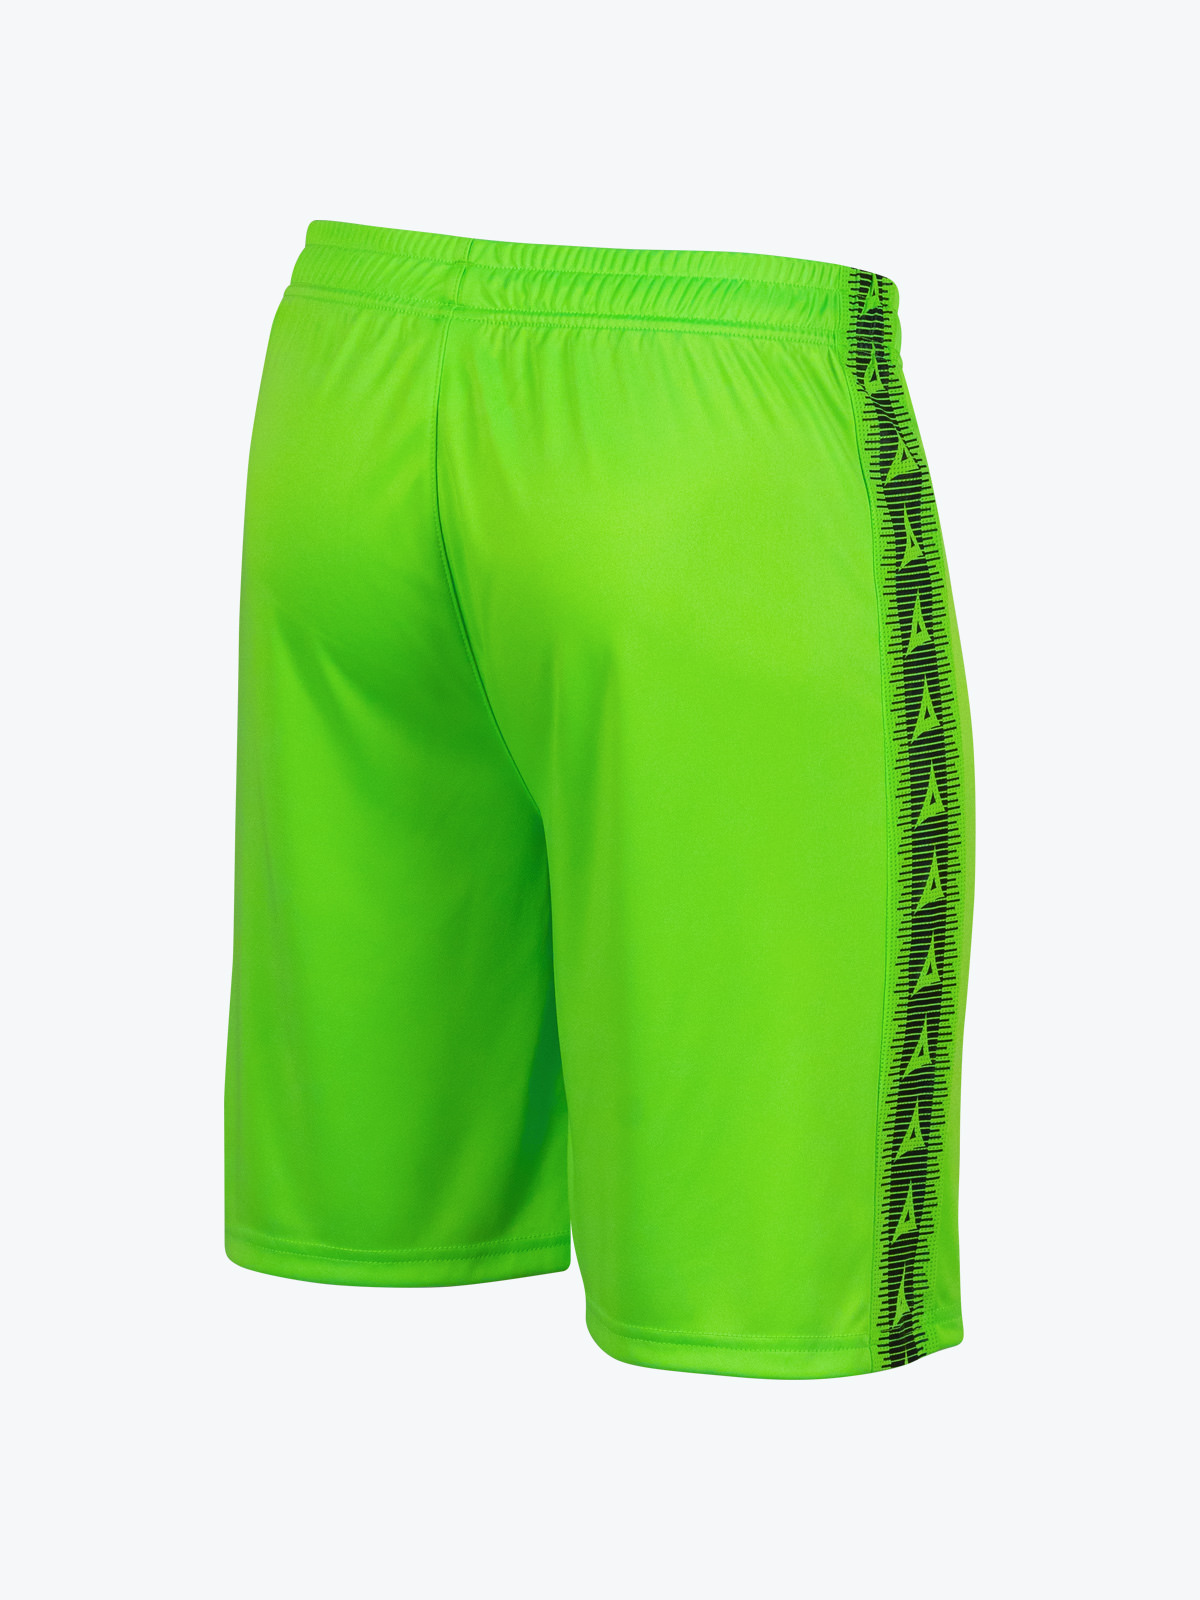 picture of evolve short - neon green